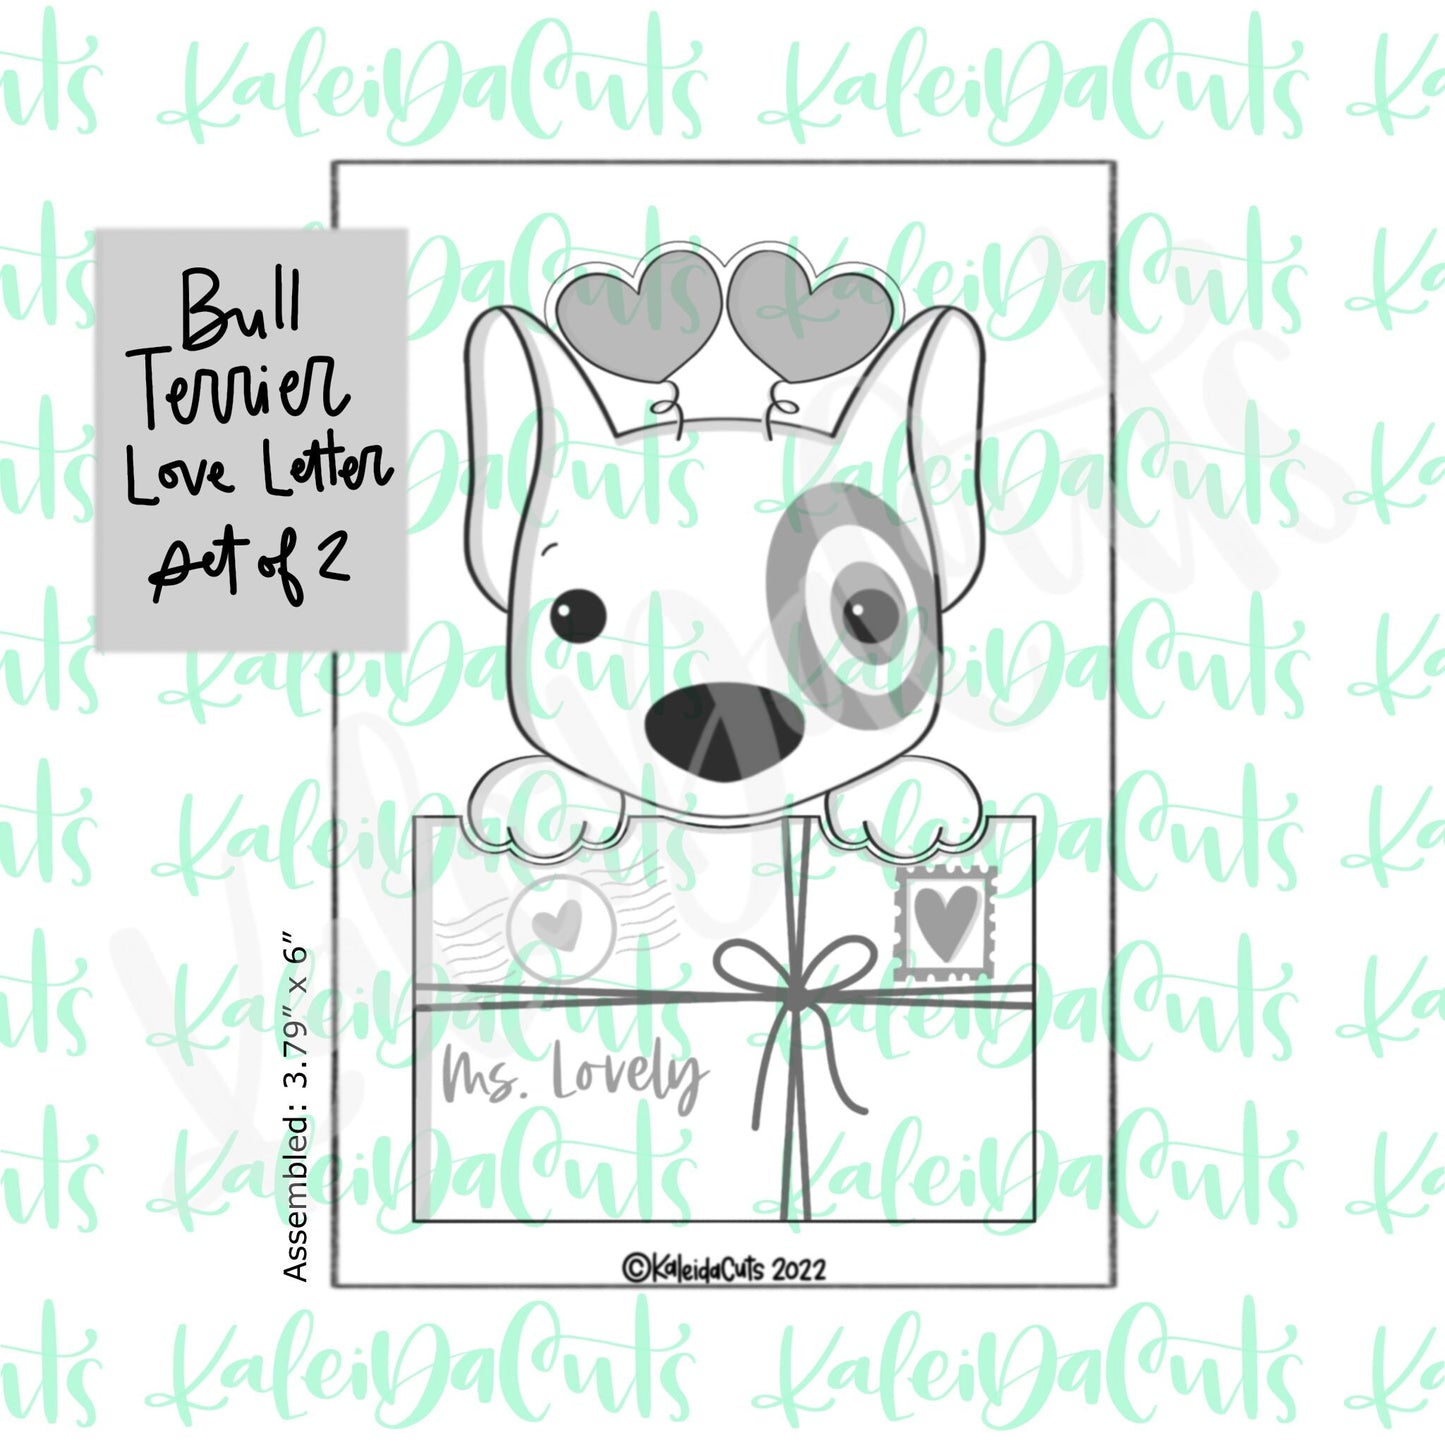 Bull Terrier Love Letter Set of 2 Cookie Cutters